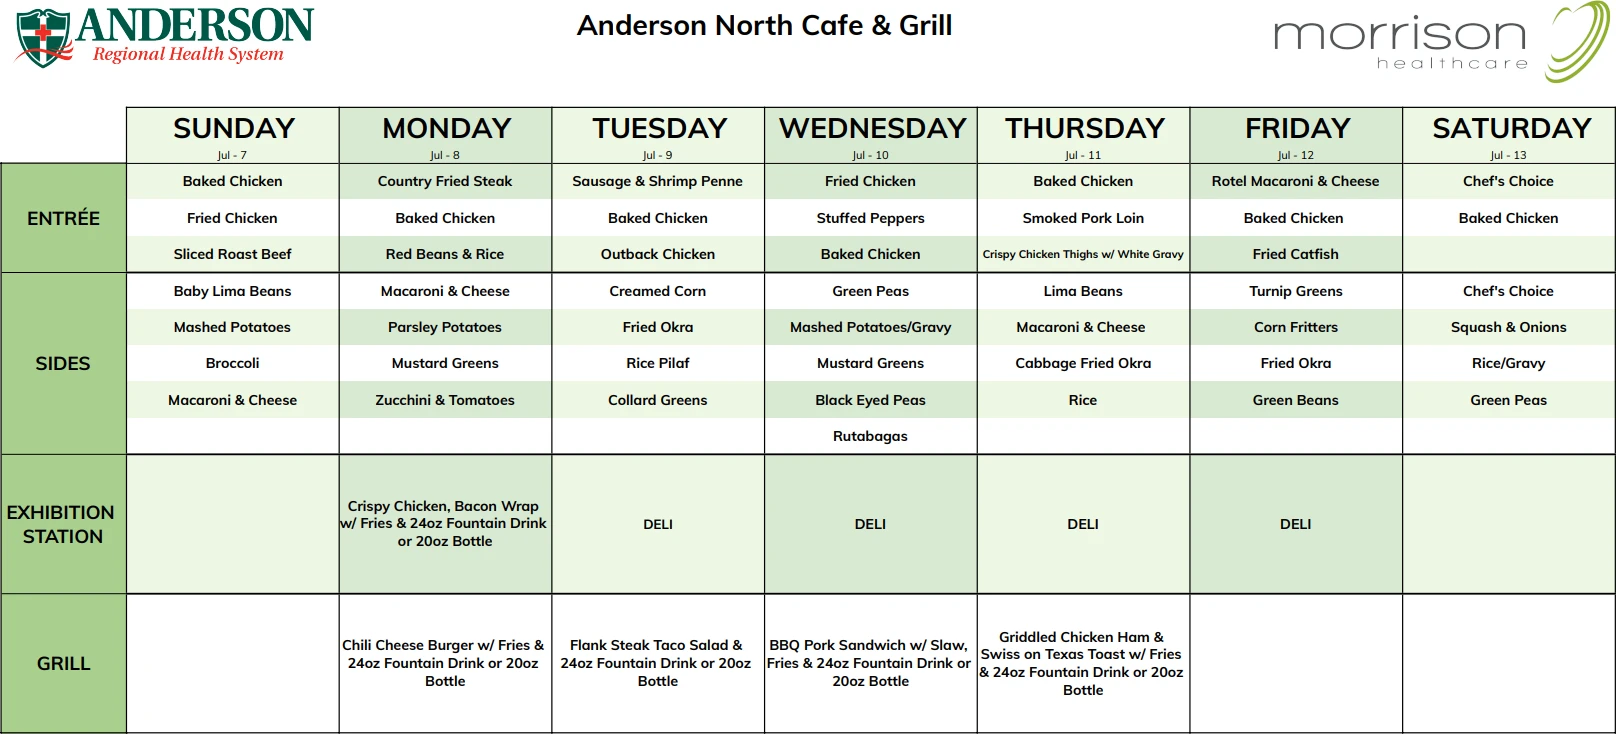 Weekly menu schedule for Anderson North Cafe & Grill